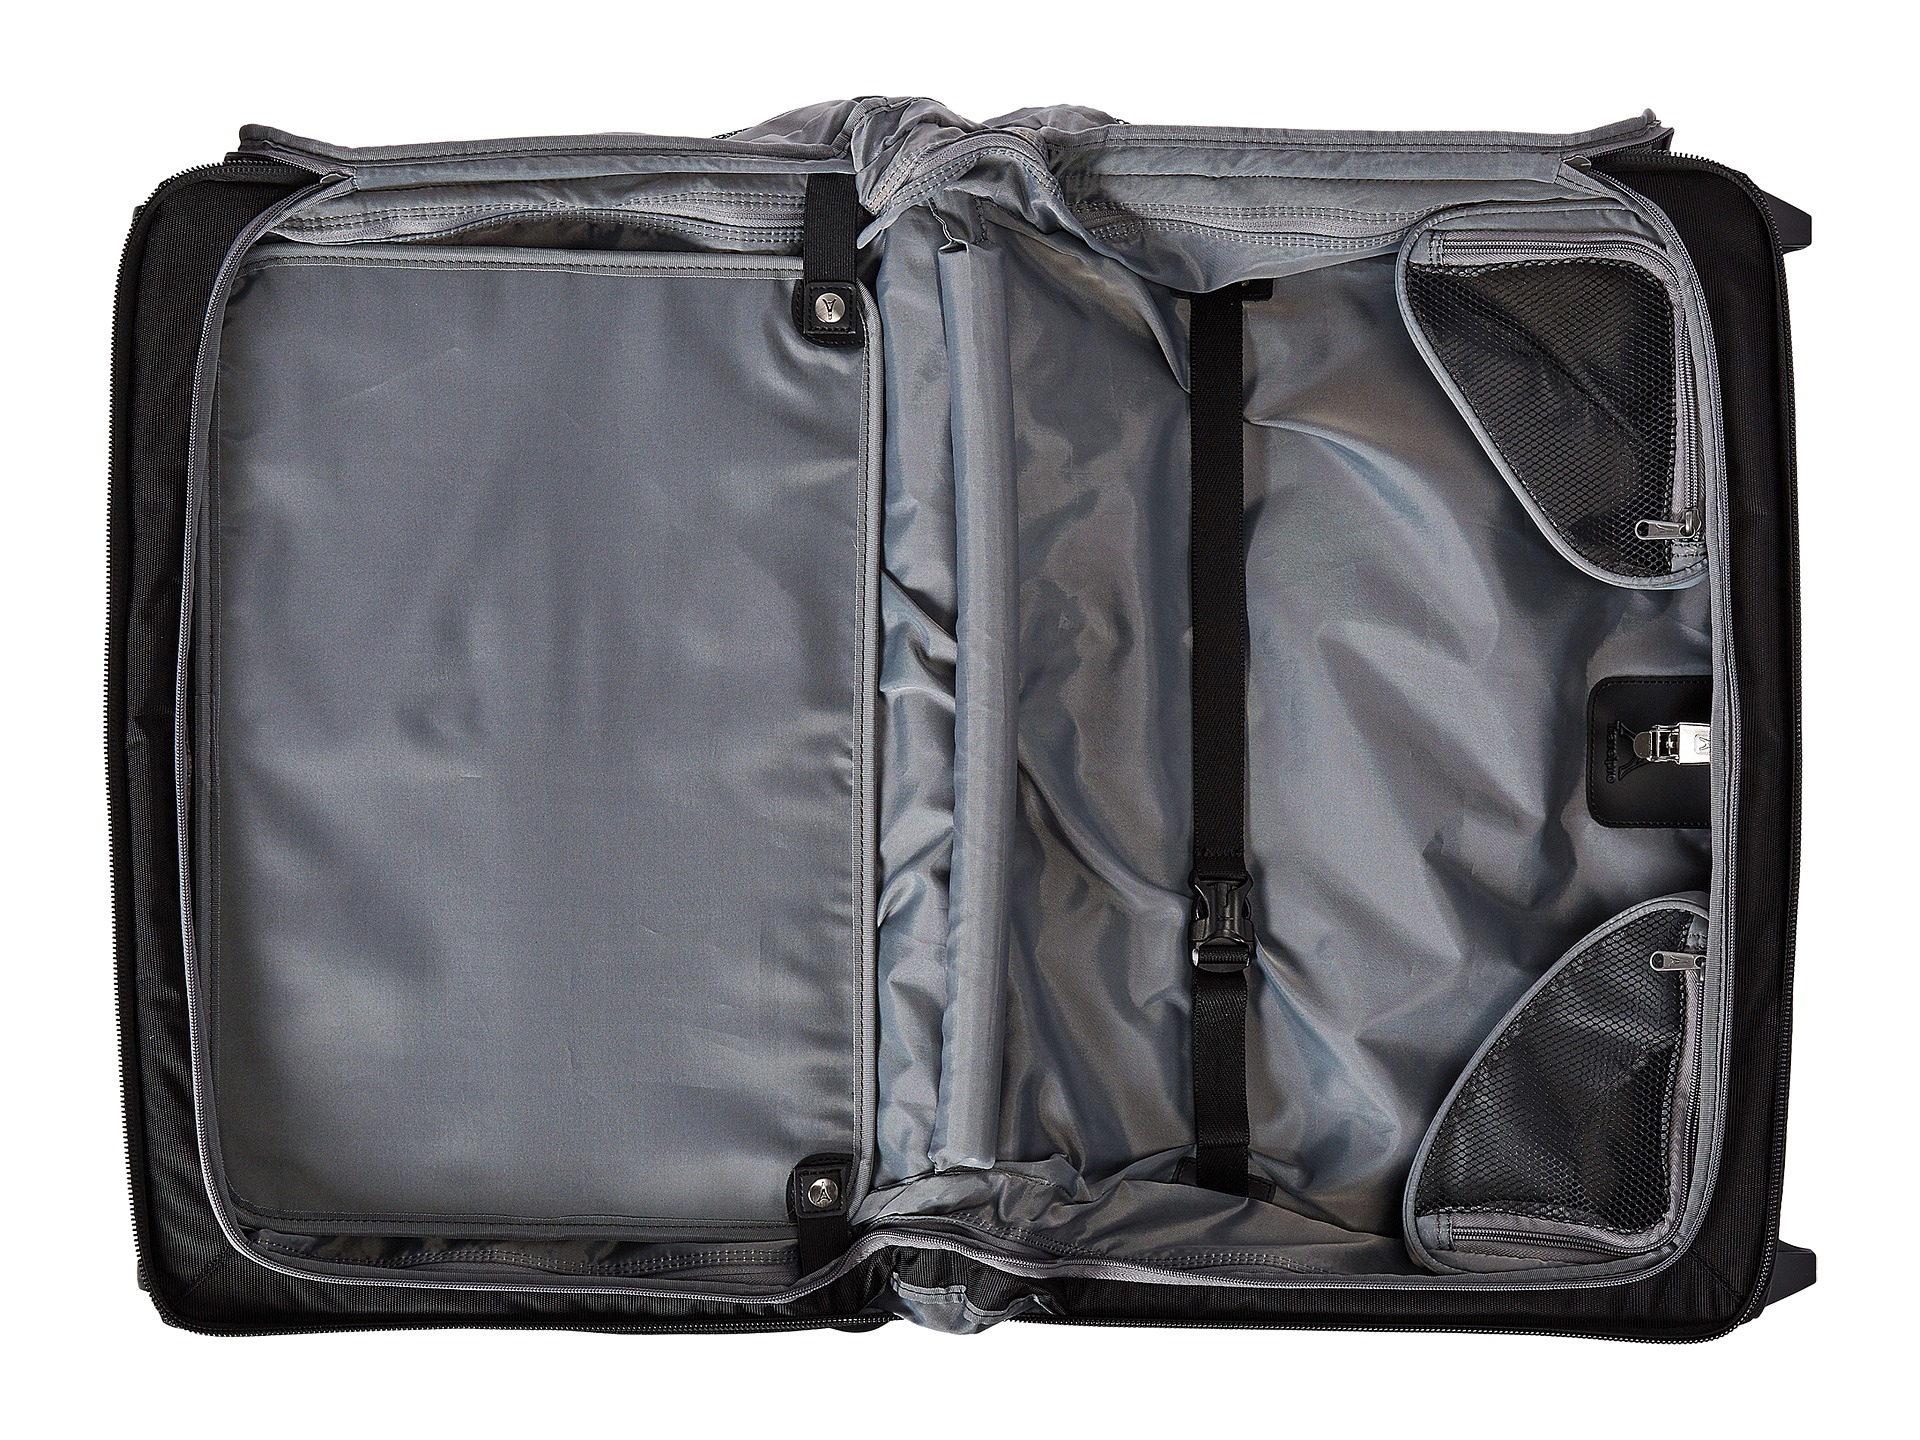 Travelpro Crew 11 - Carry-On Rolling Garment Bag - 0 Free Shipping BOTH Ways